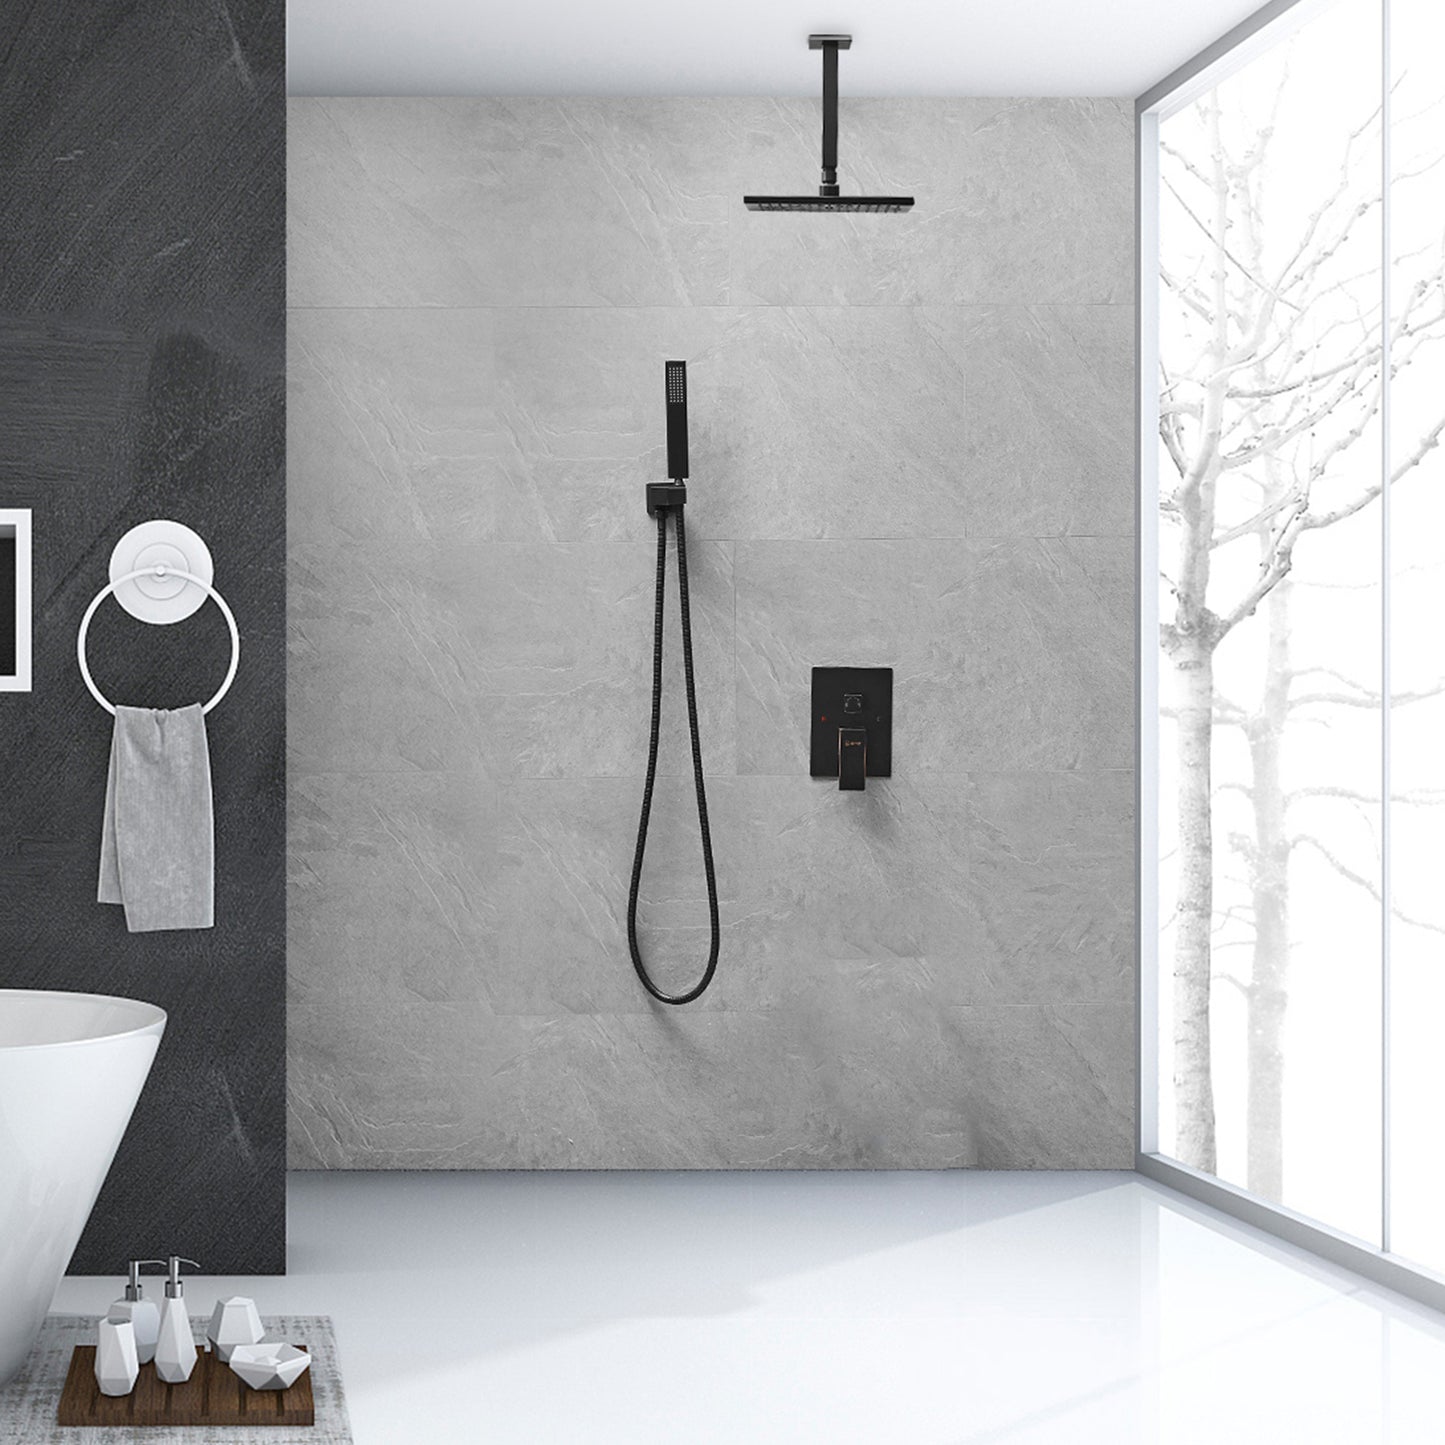 Square Oil Rubbed Bronze High Pressure Shower Faucet with 2 Handles and 10 Ceiling Shower Head